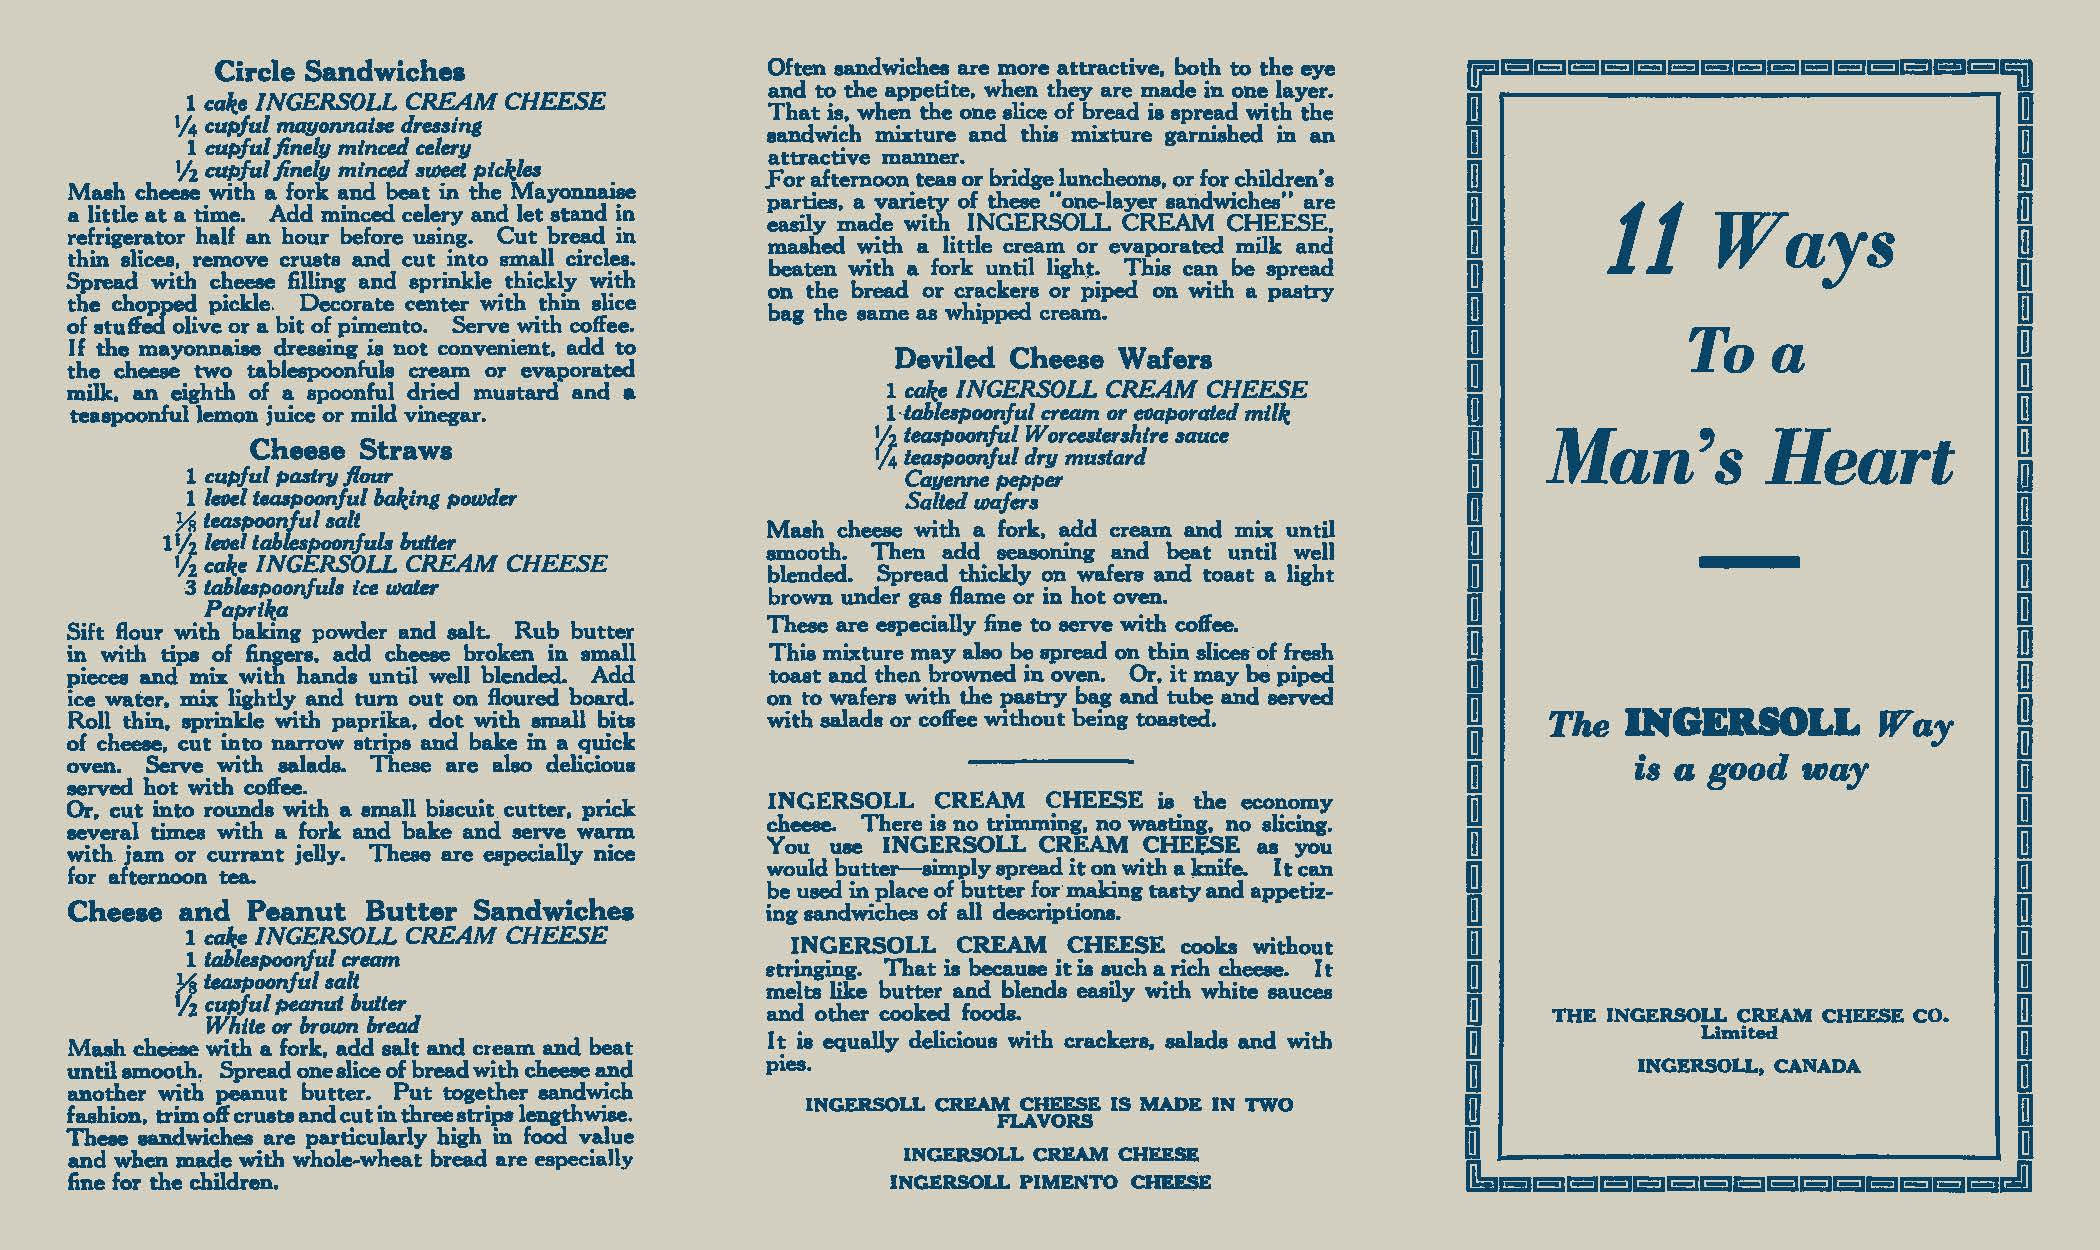 Front page of The Ingersoll Cream Cheese Co pamphlet "11 ways to a man's heart.".